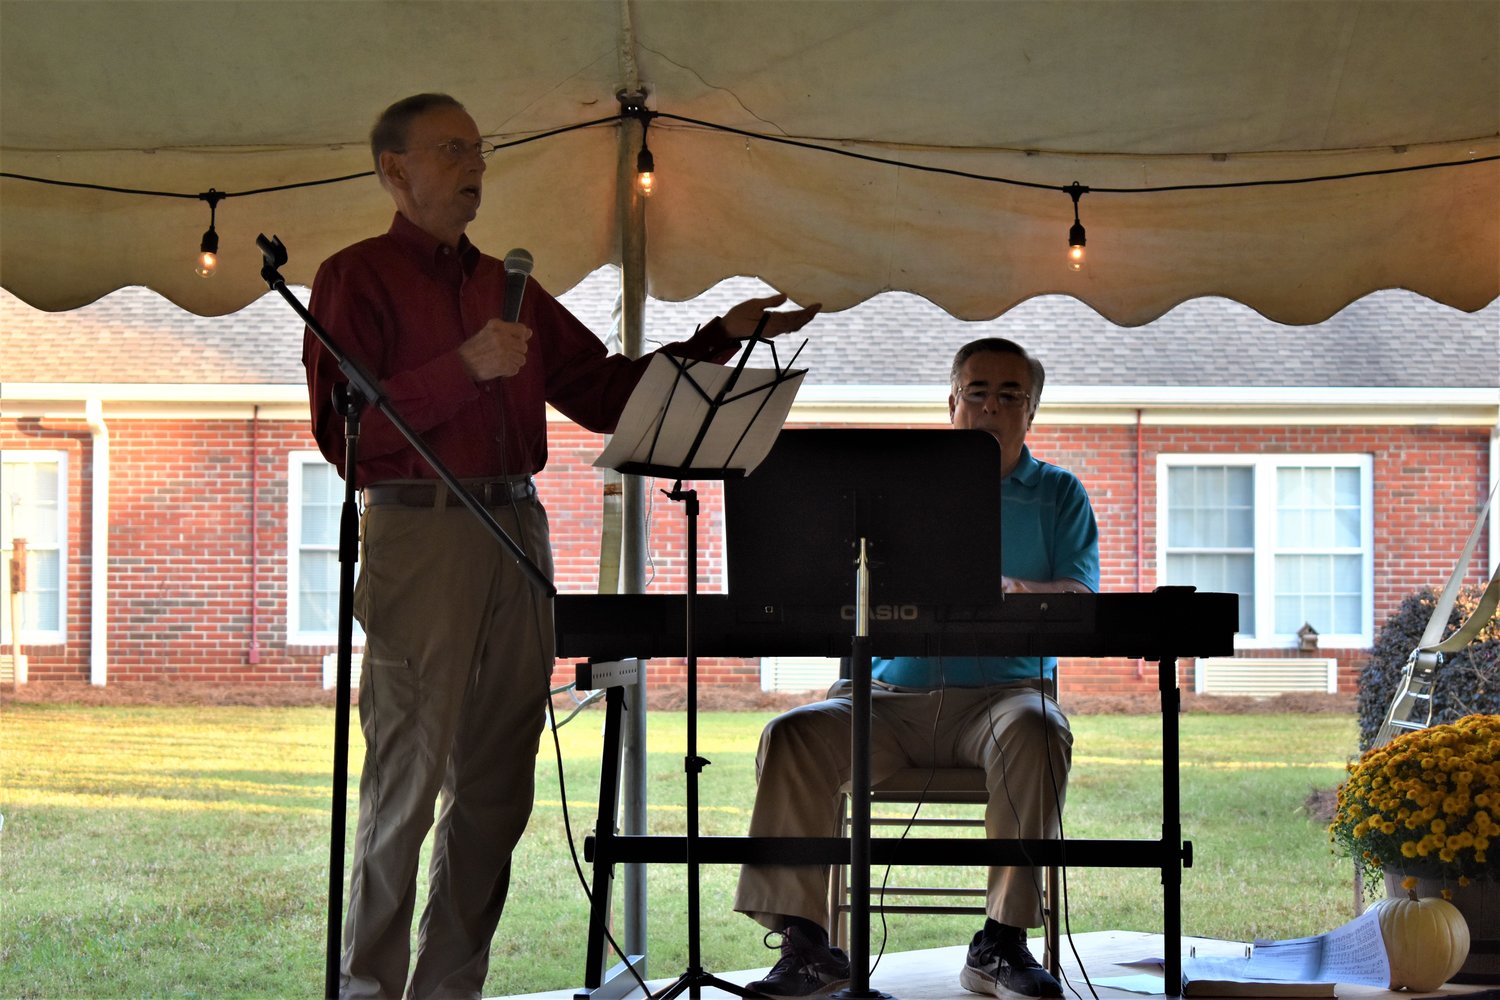 Shaded beneath a tent, Georgia Baptists lead an outdoor revival at a senior living center in Palmetto, Ga.